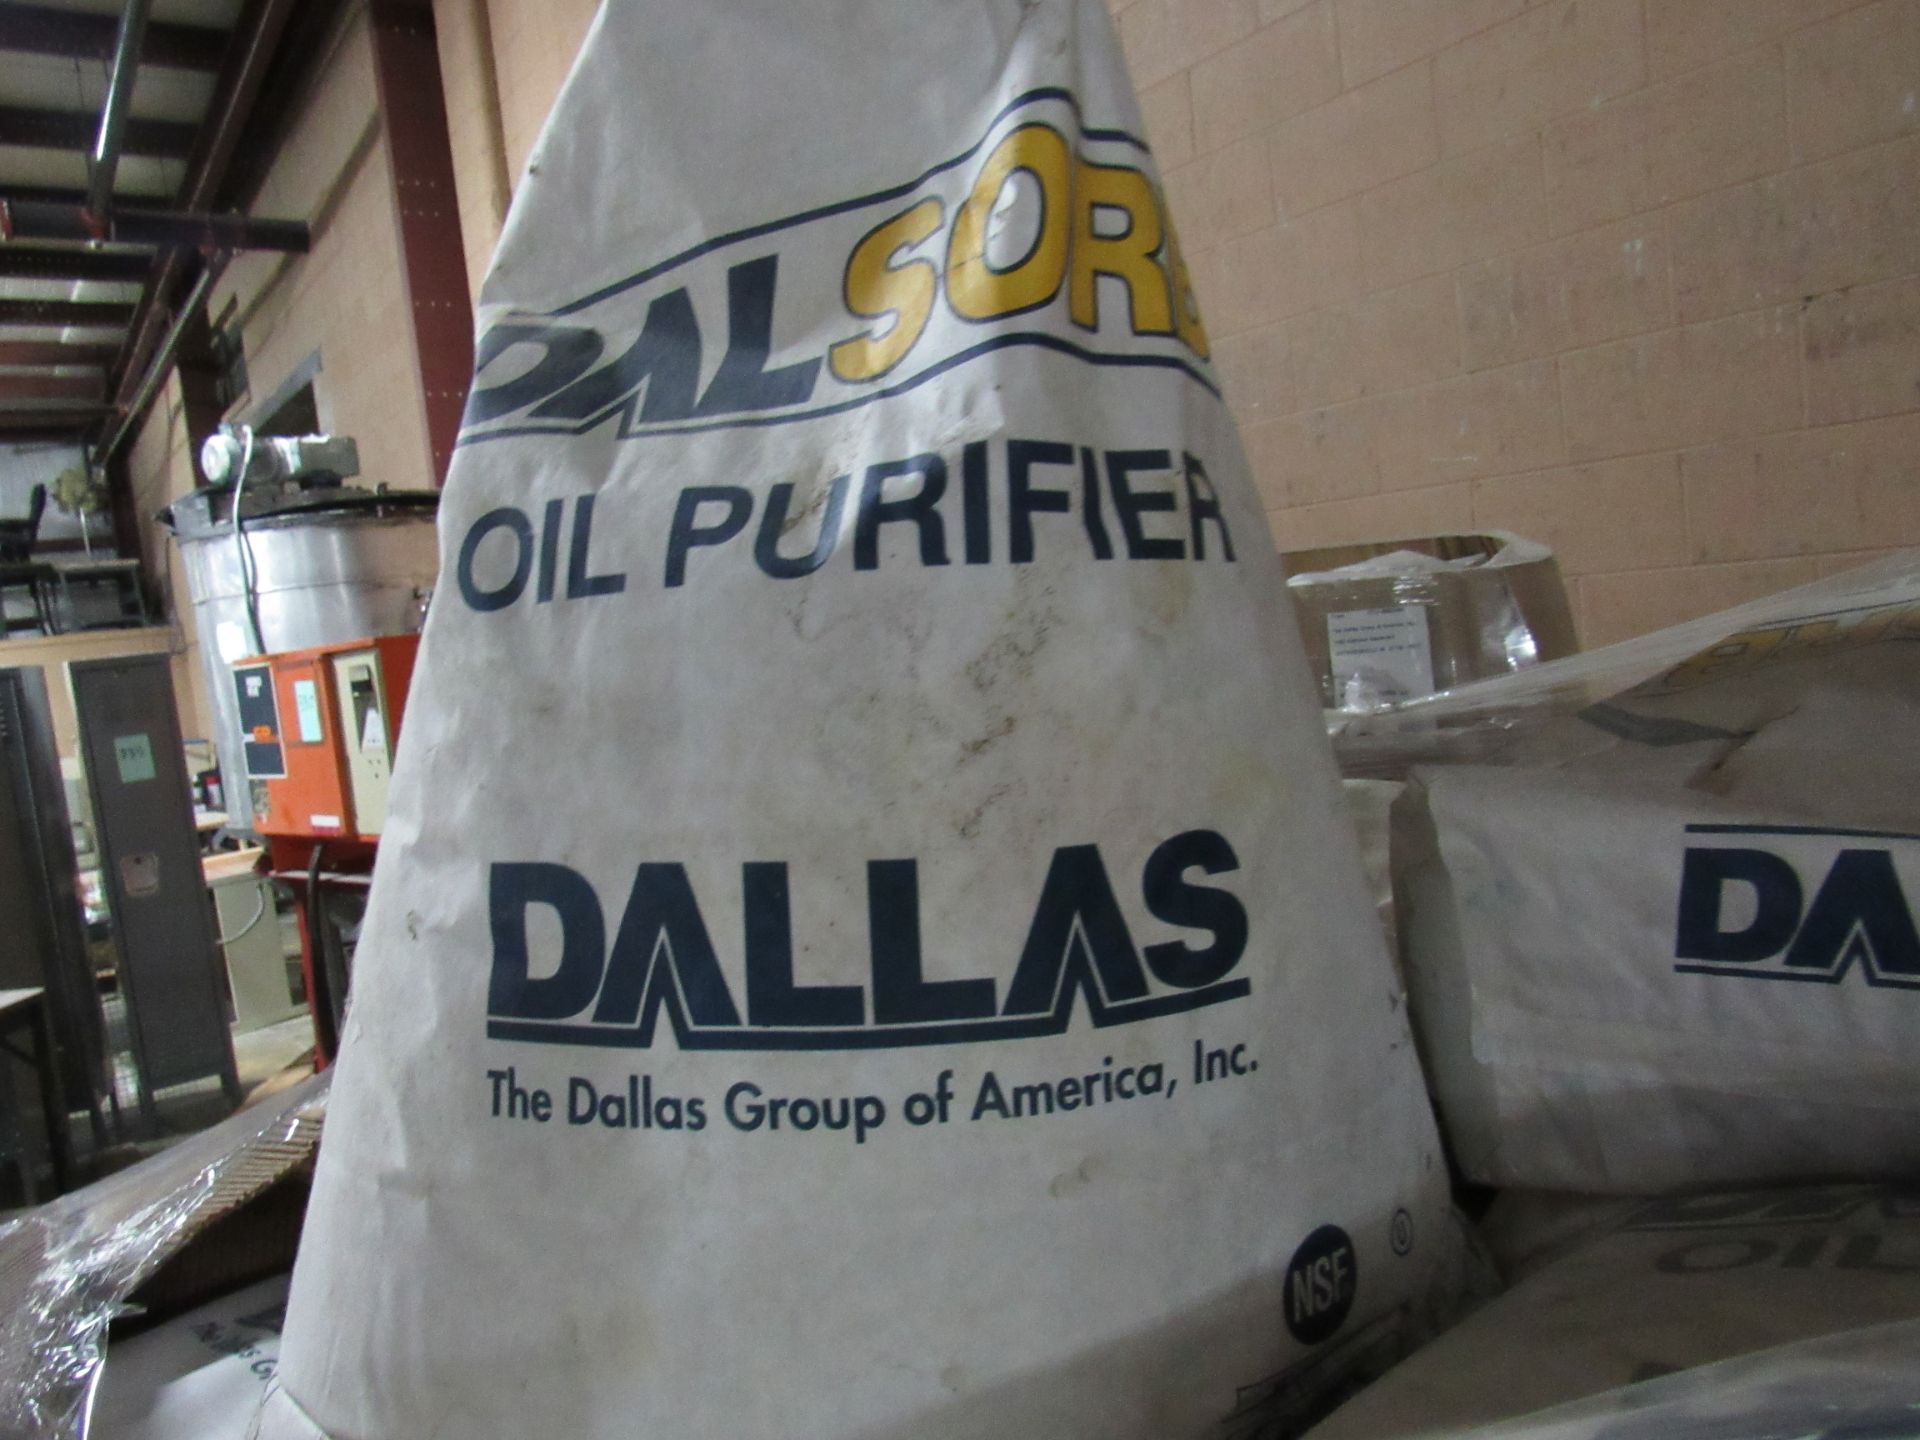 5 Pallets of DalSorb Oil Purifier -- -- Removal and loading free (LOCATED IN IOWA)***EUSA*** - Image 4 of 5